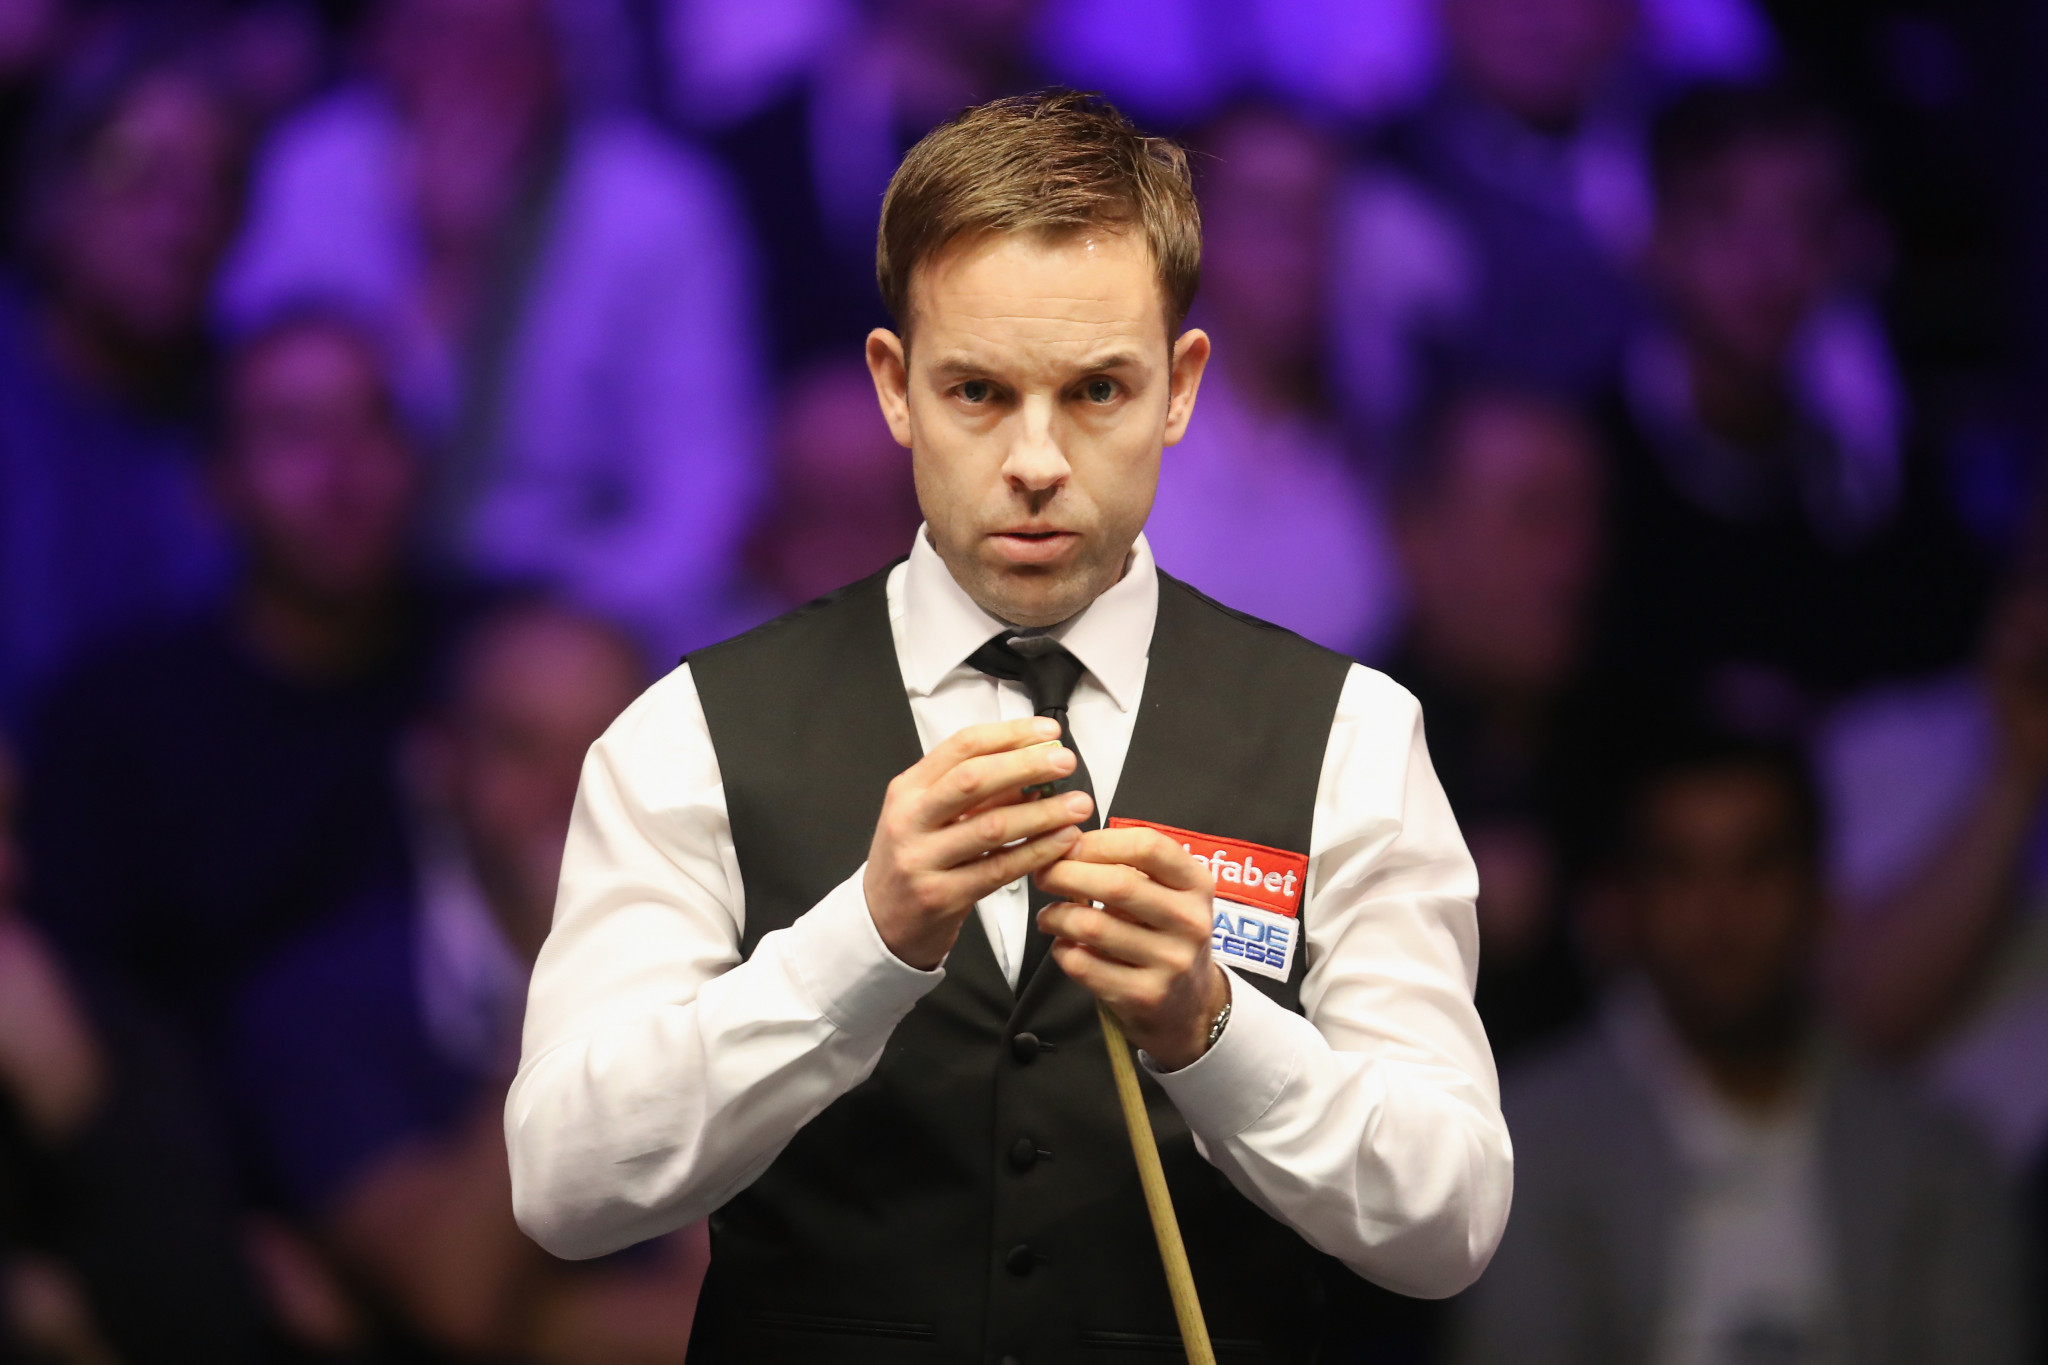 England's Ali Carter was among the other players to progress to the second round today ©Getty Images